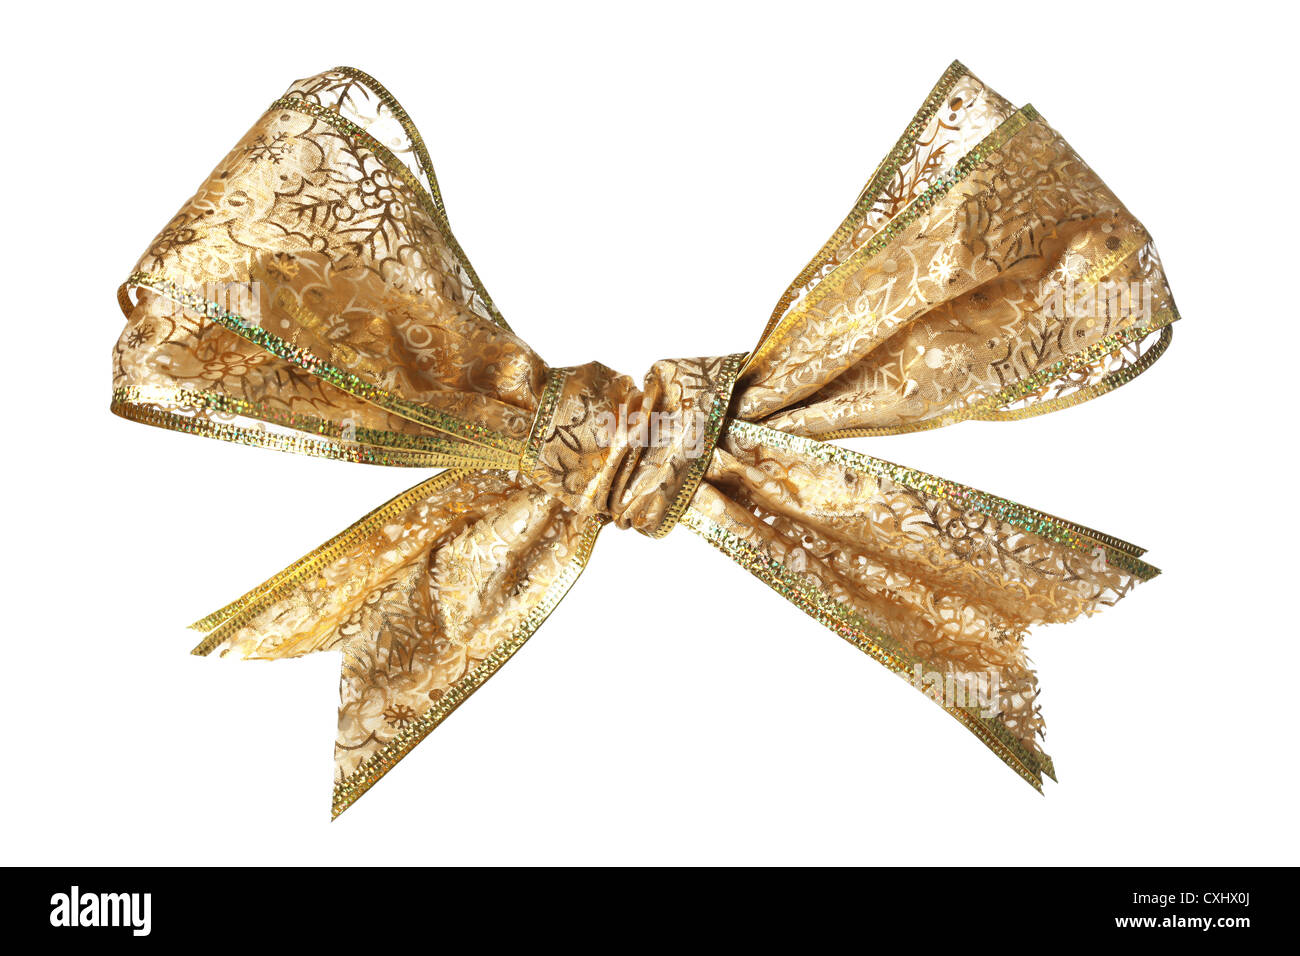 Gold gift bow stock photo. Image of pattern, shiny, package - 17169450